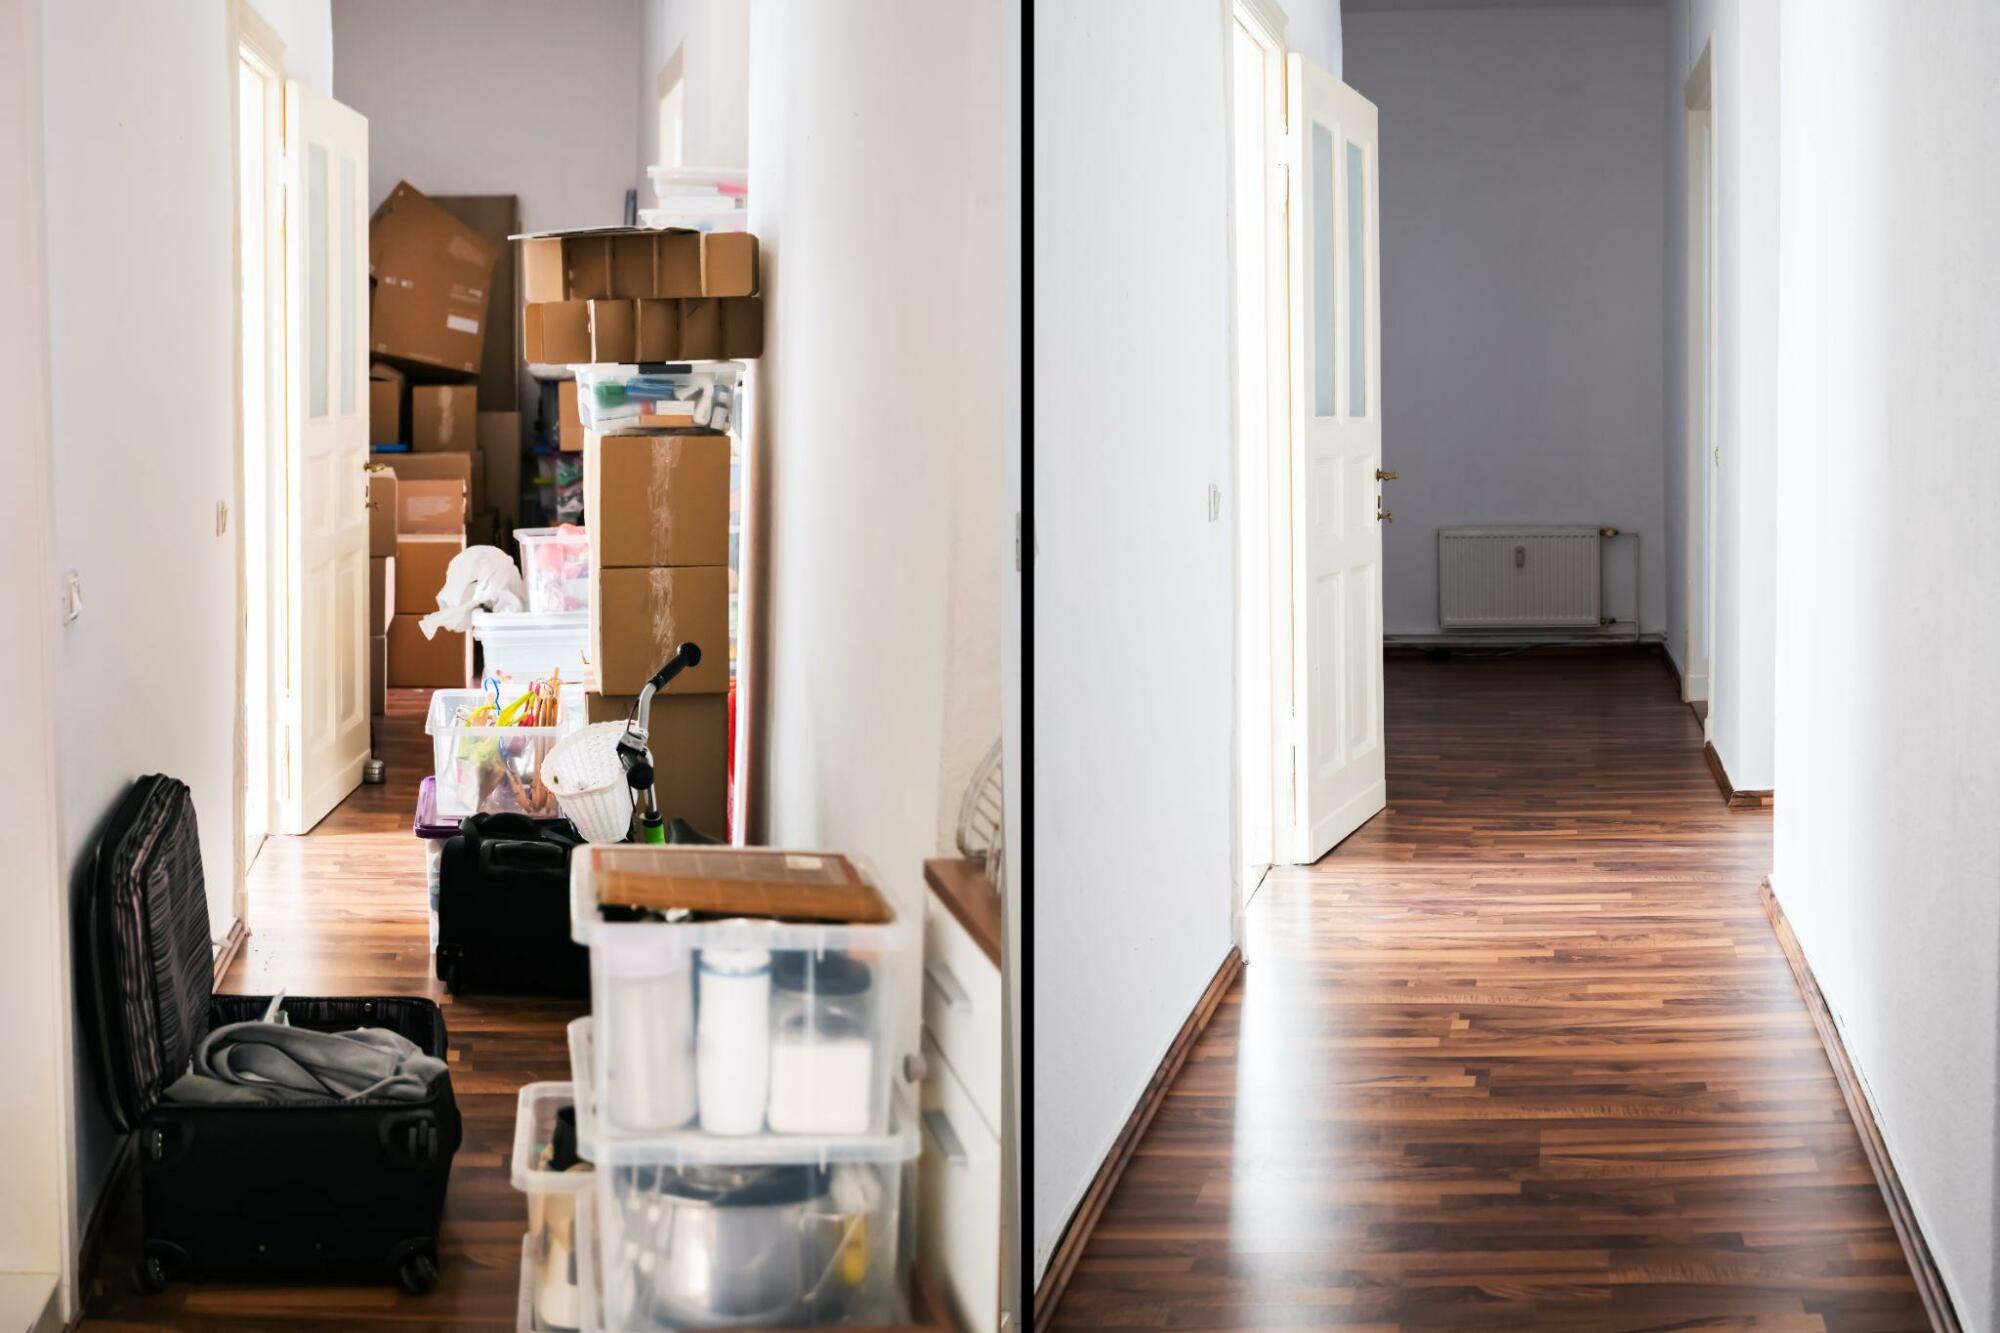 Before and after photos showing the decluttering of a hallway filled with boxes.